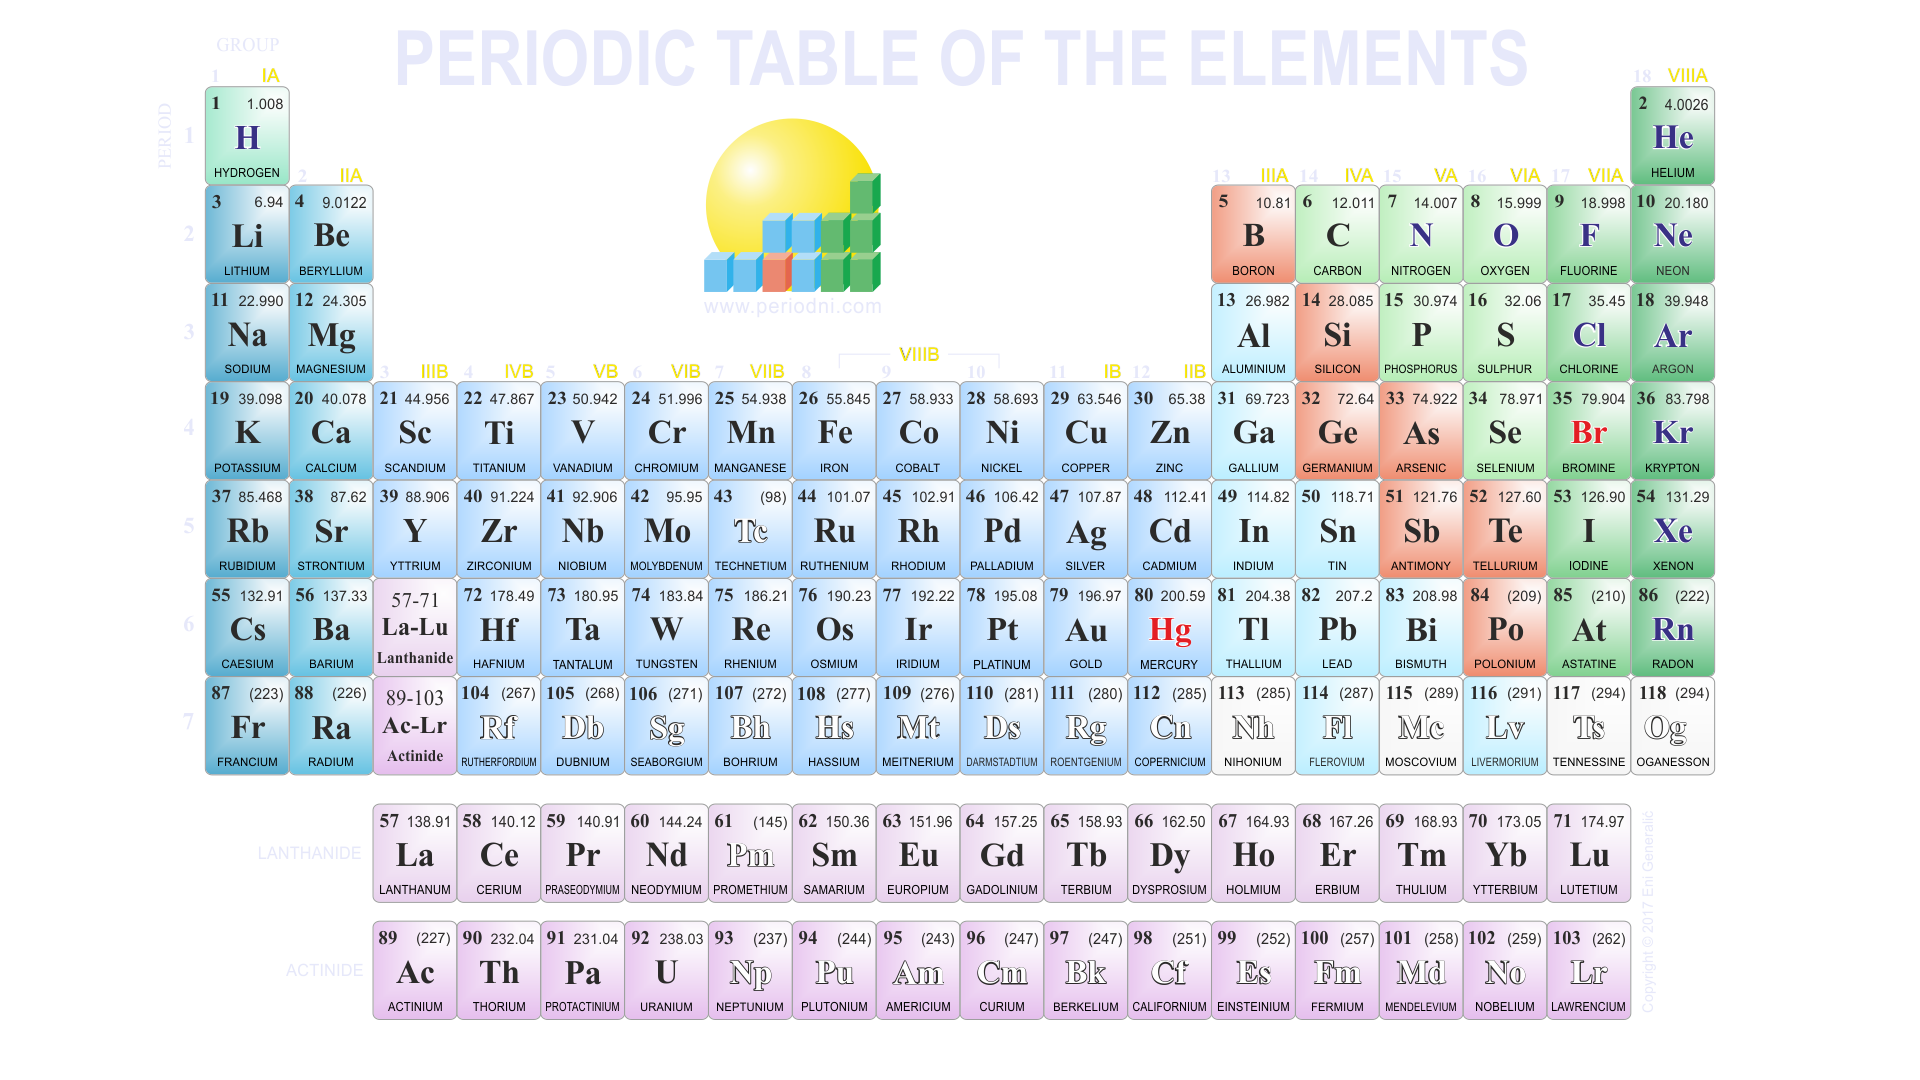 Direct download link: https://www.periodni.com/gallery/periodic_table-hd-1920x1080-dark_background.png